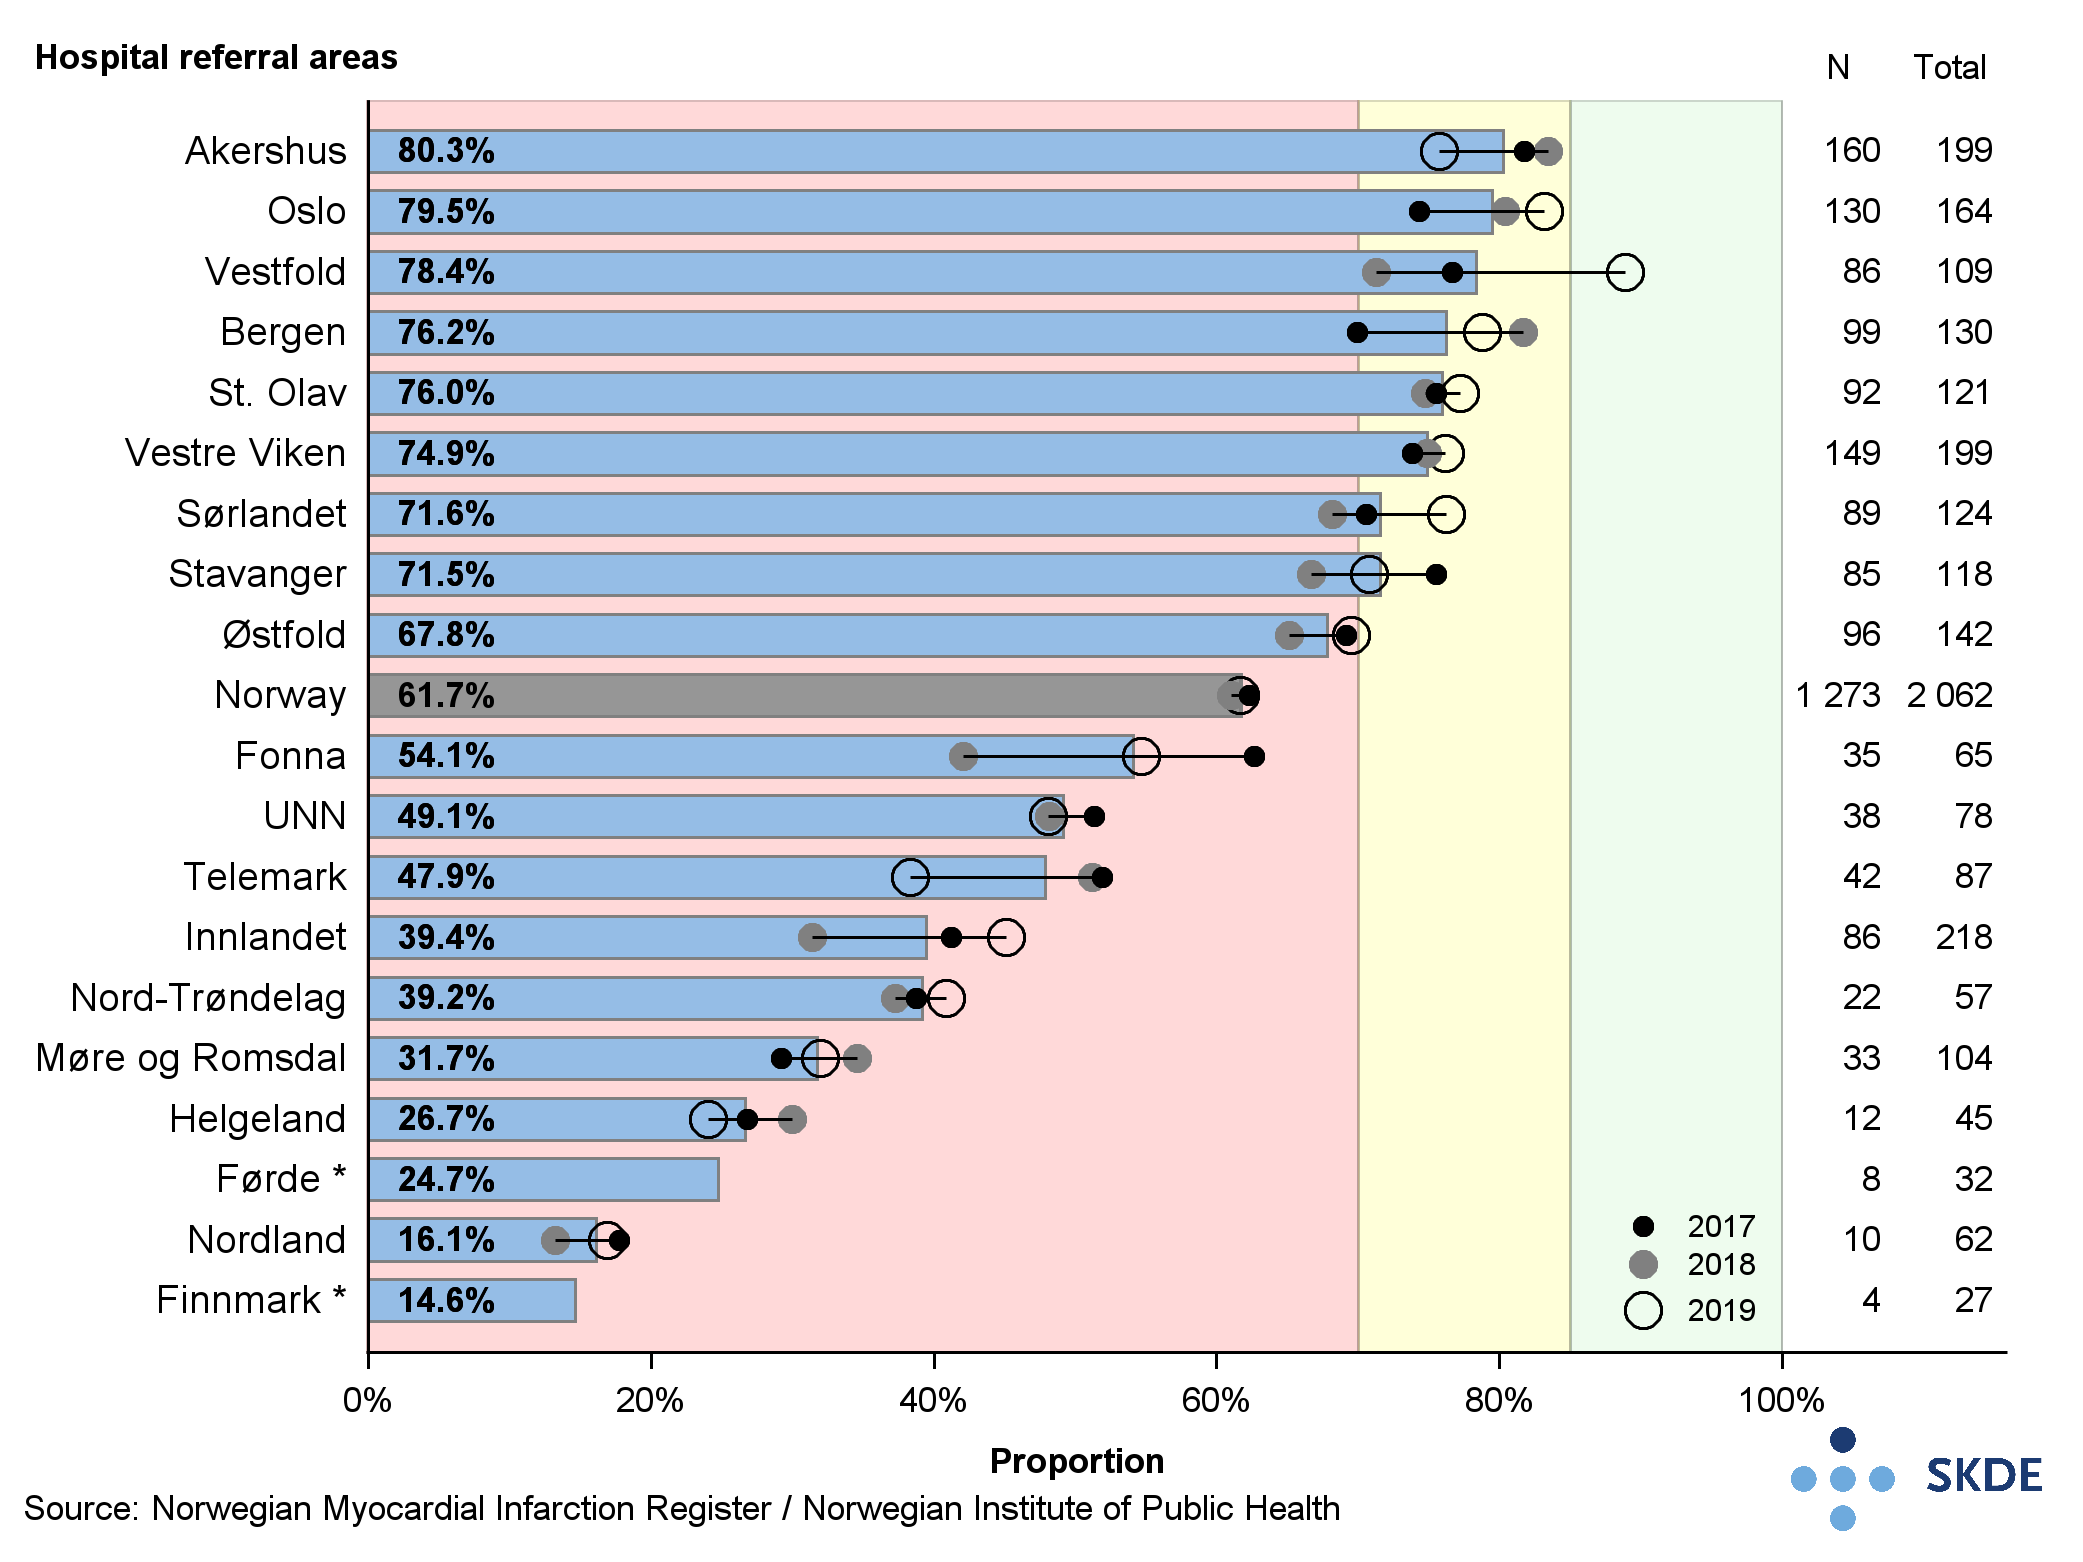 Proportion of patients with STEMI who received reperfusion therapy within recommended time